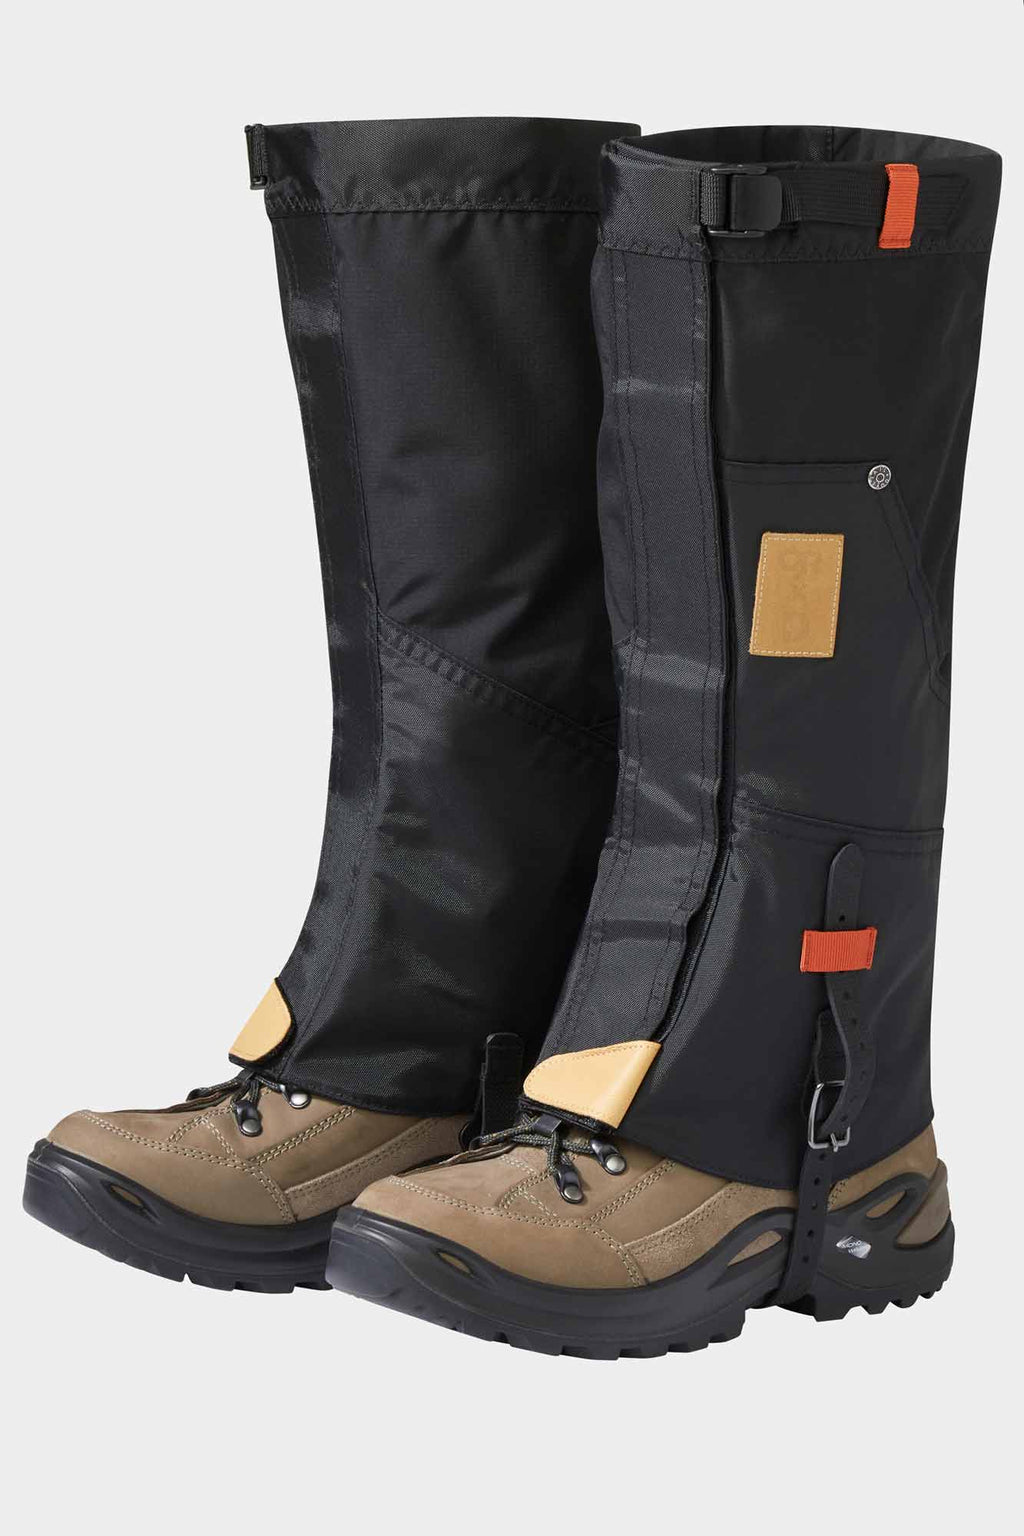 OR x Dovetail Women's Field Gaiters Accessories Dovetail Workwear